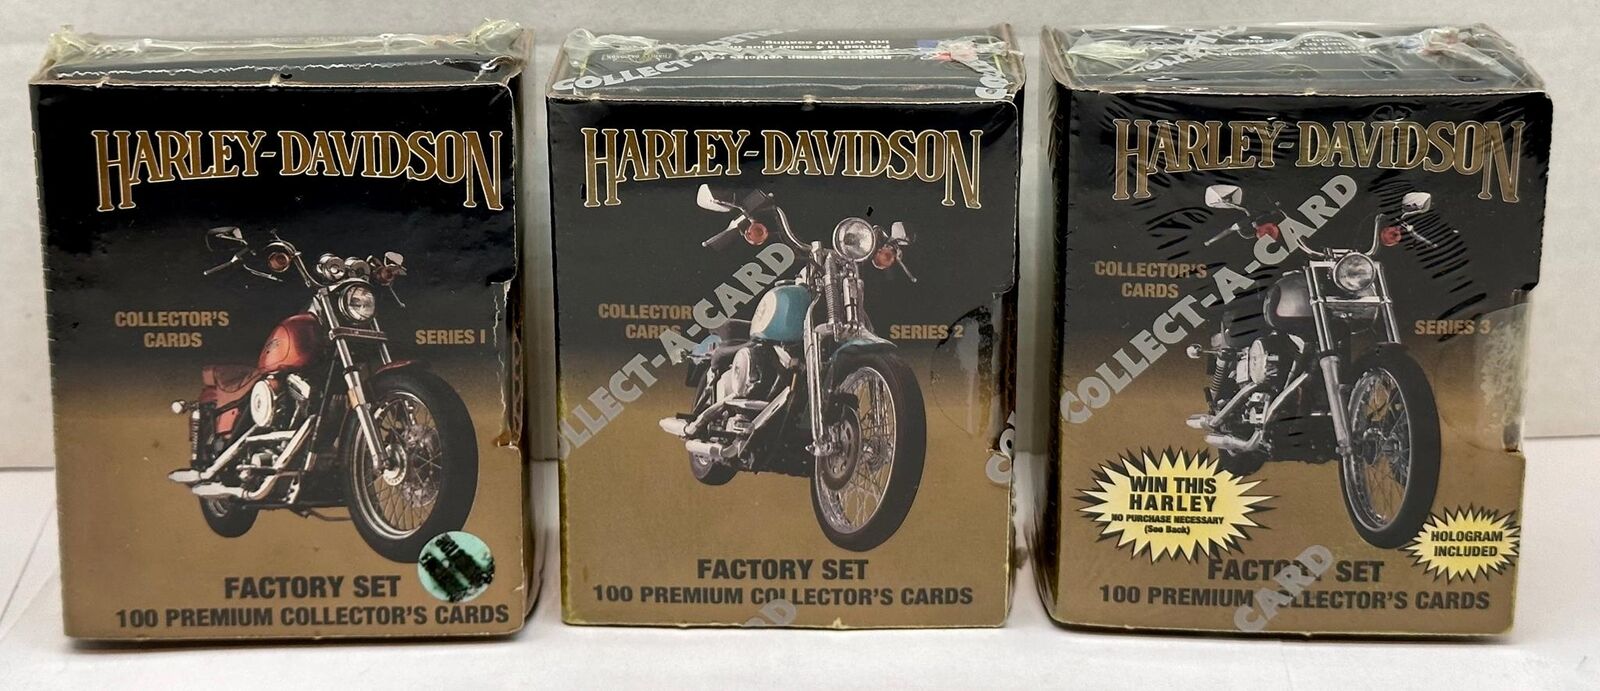 1992 Harley Davidson Collector Cards Series 1, 2 & 3 Trading Card Factory Sets